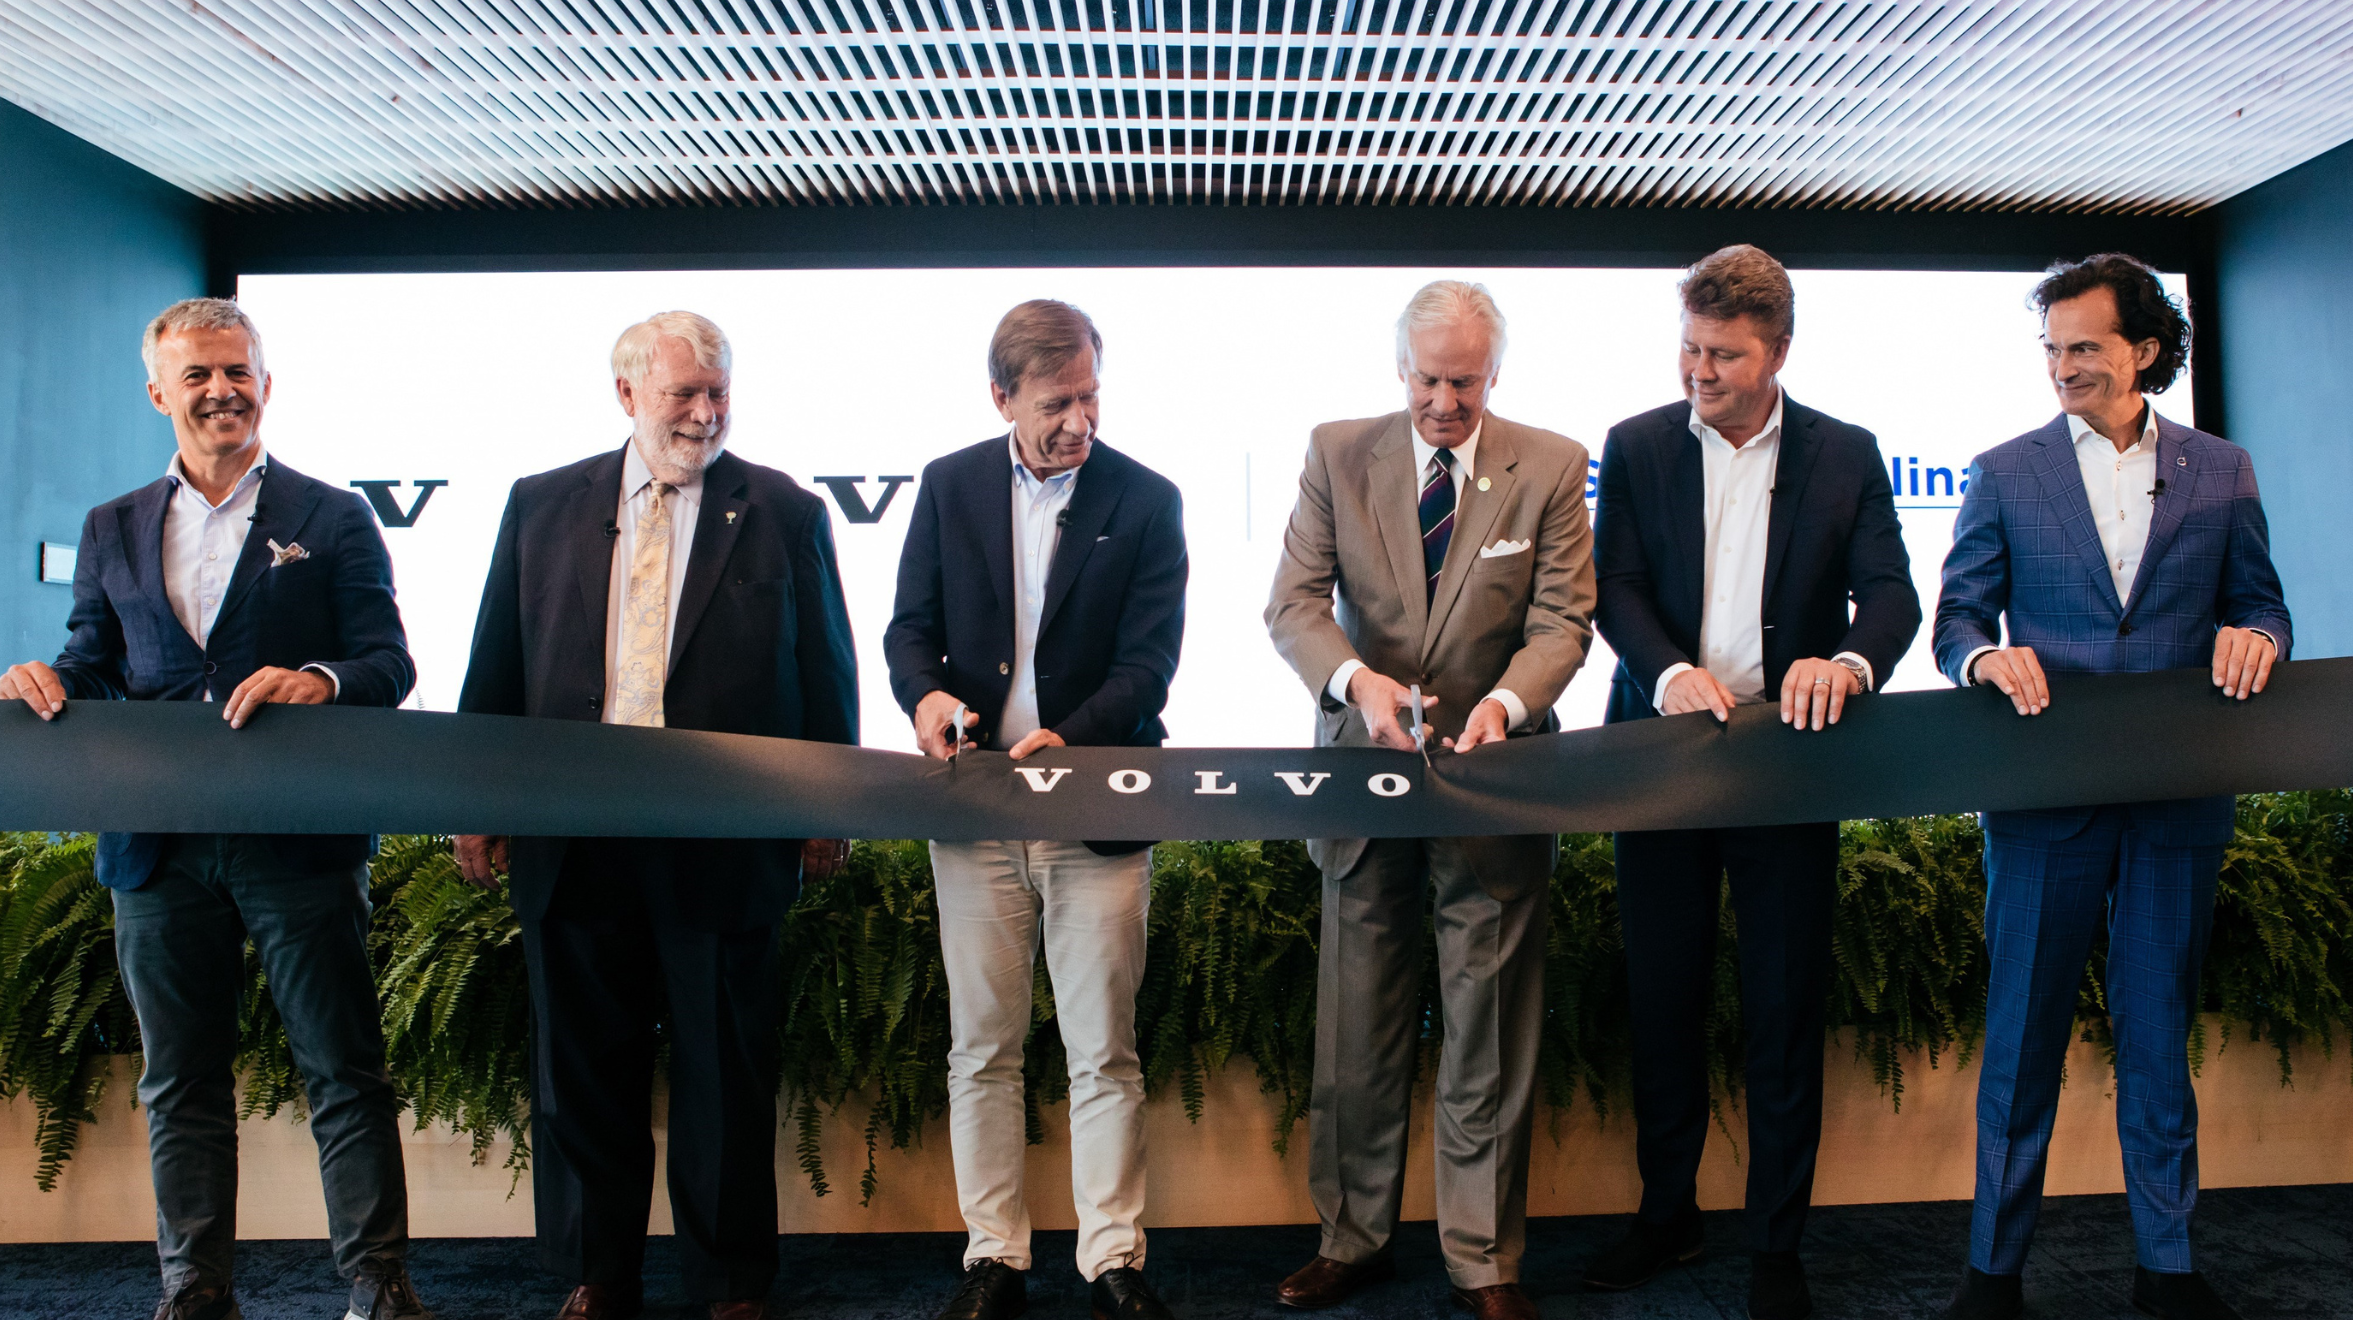 Six people including David Stenström who is the plant manager at Volvo Car Charleston Plant hold up a black ribbon with the word Volvo on it. The two people in the center prepare to cut into the middle of it to celebrate the official opening of Volvo Car University Campus in South Carolina.